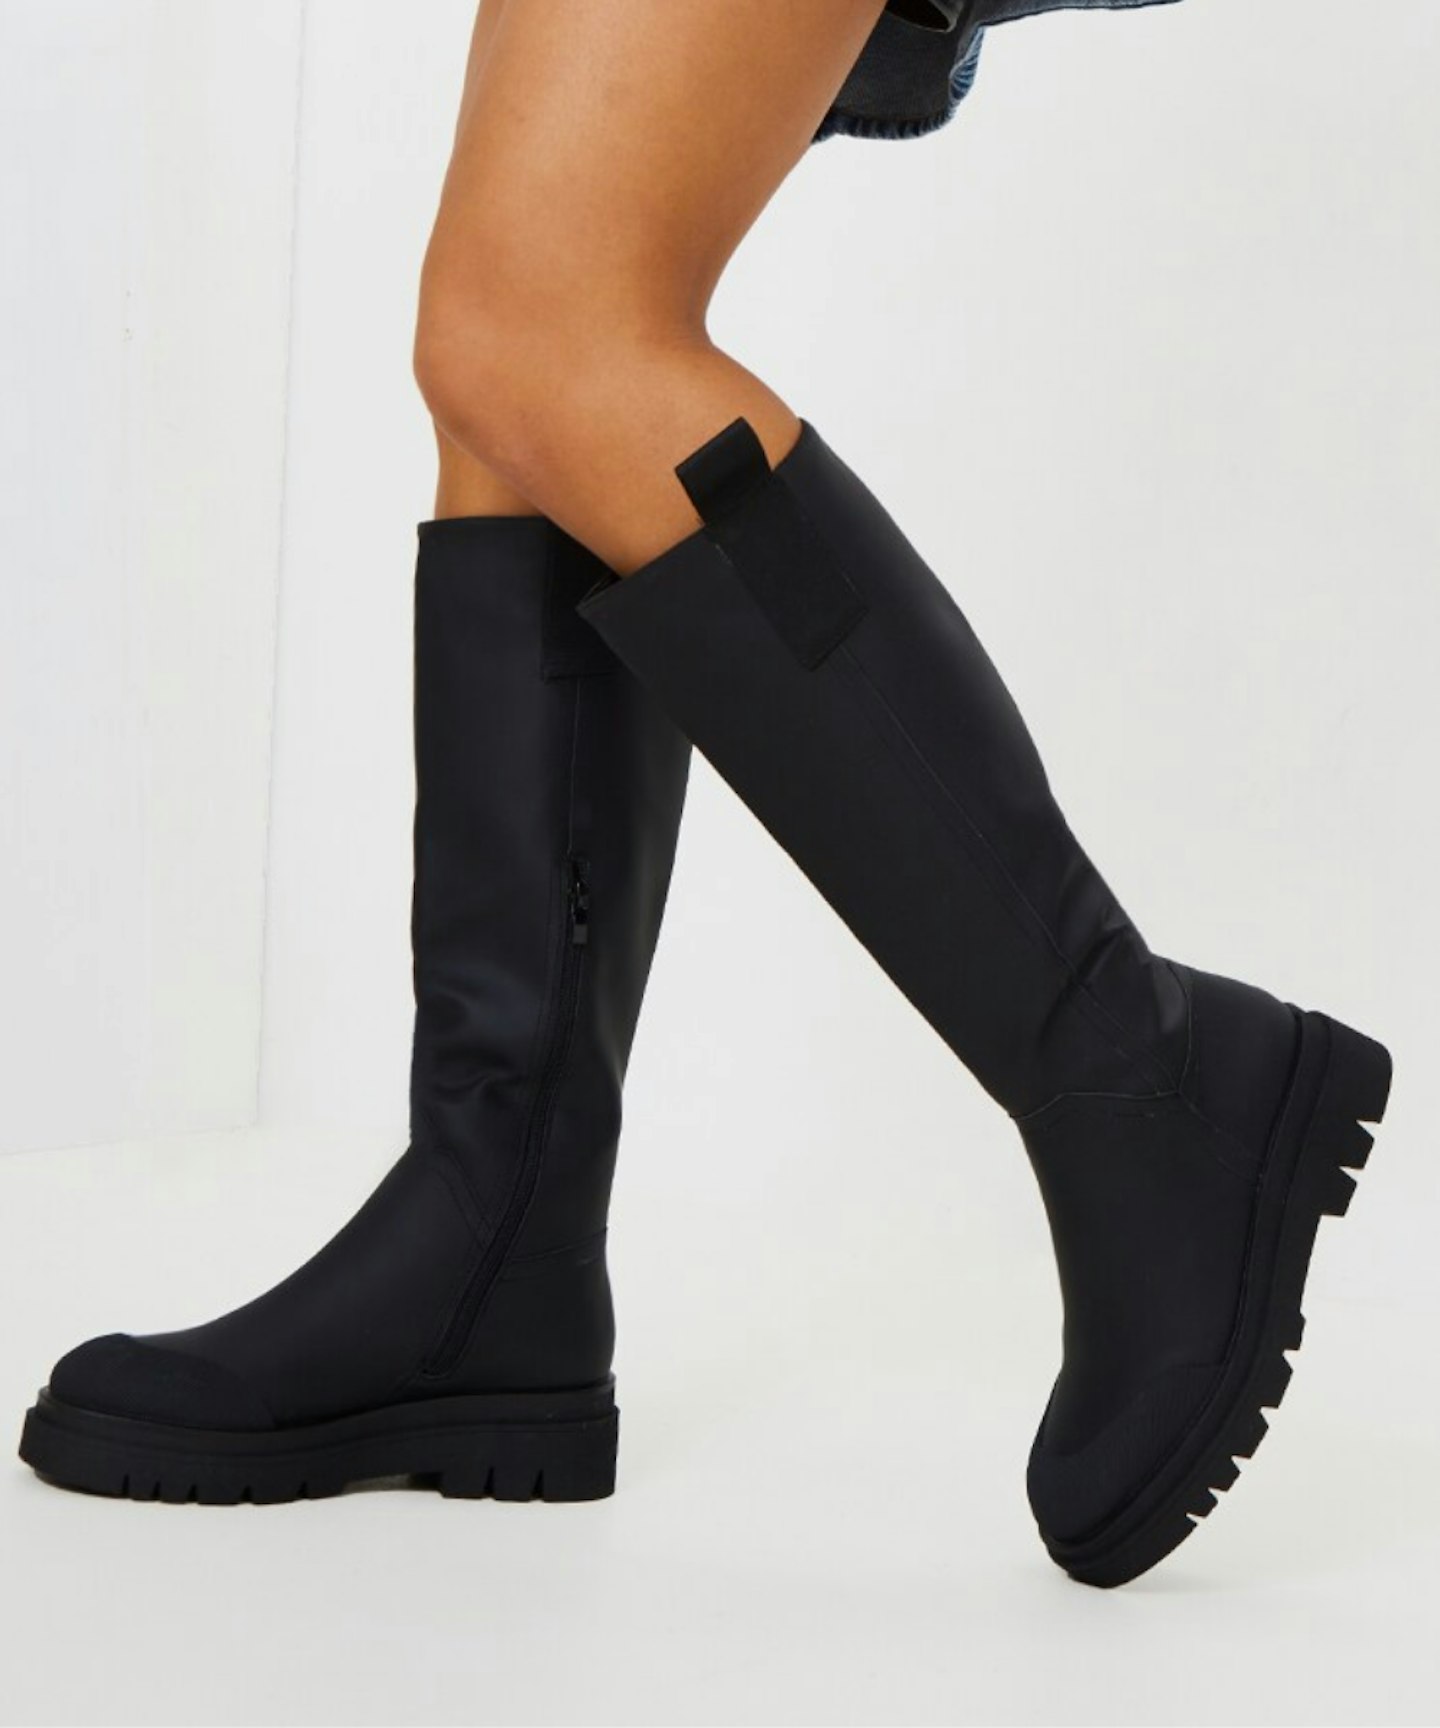 PrettyLittleThing Black Rubber Chunky Sole Welly Boots